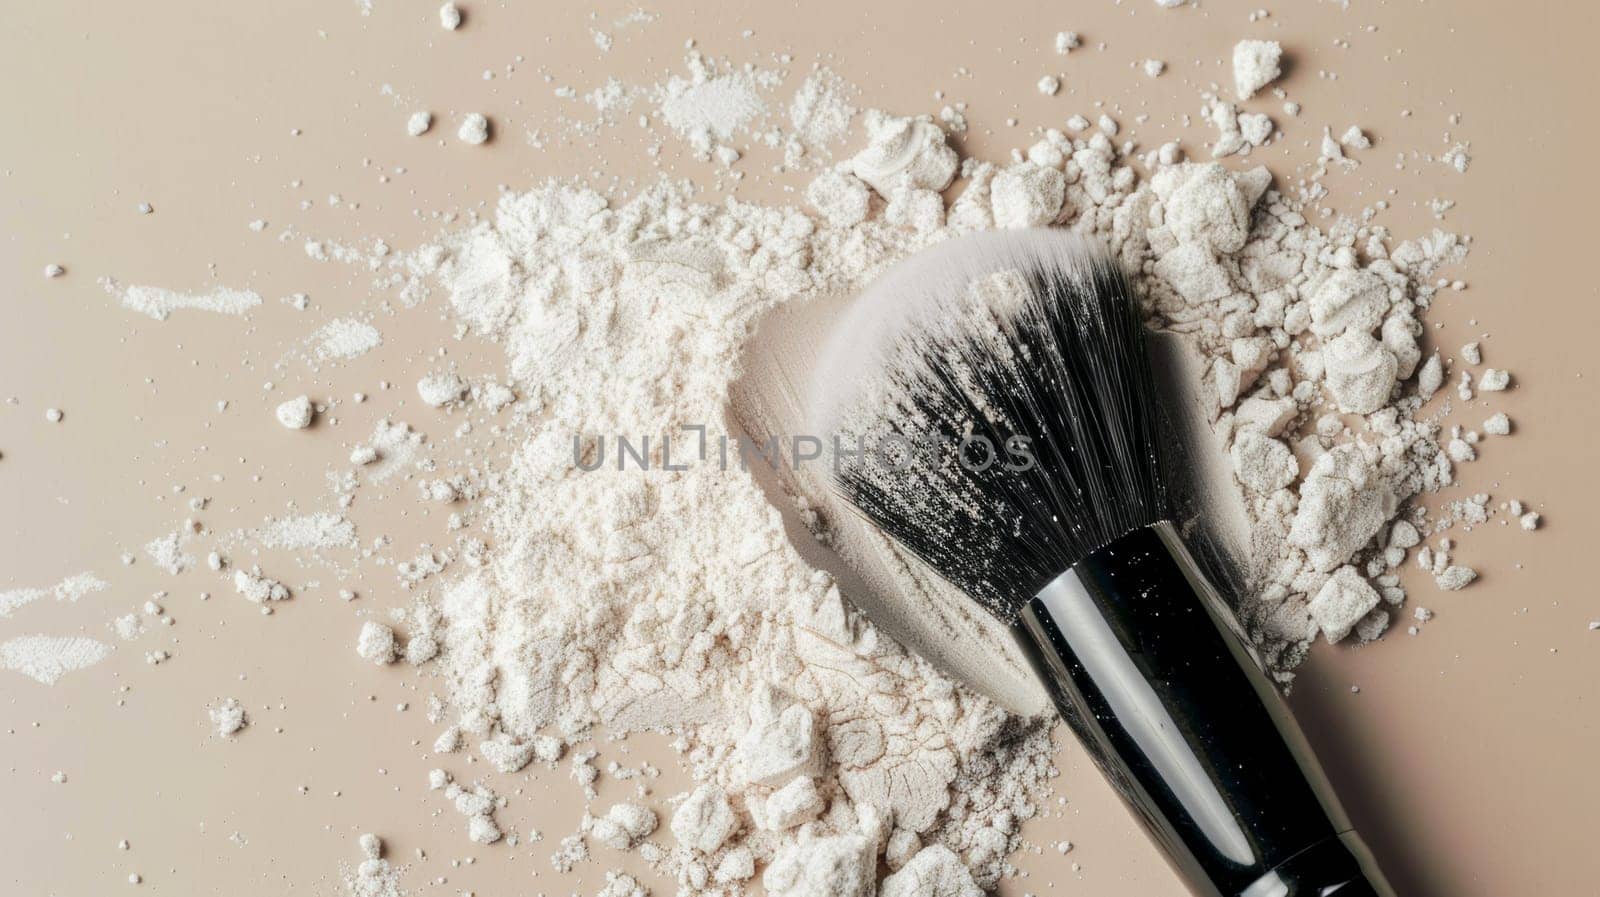 Close up of a makeup brush and powder explosion on a beige background by Anastasiia